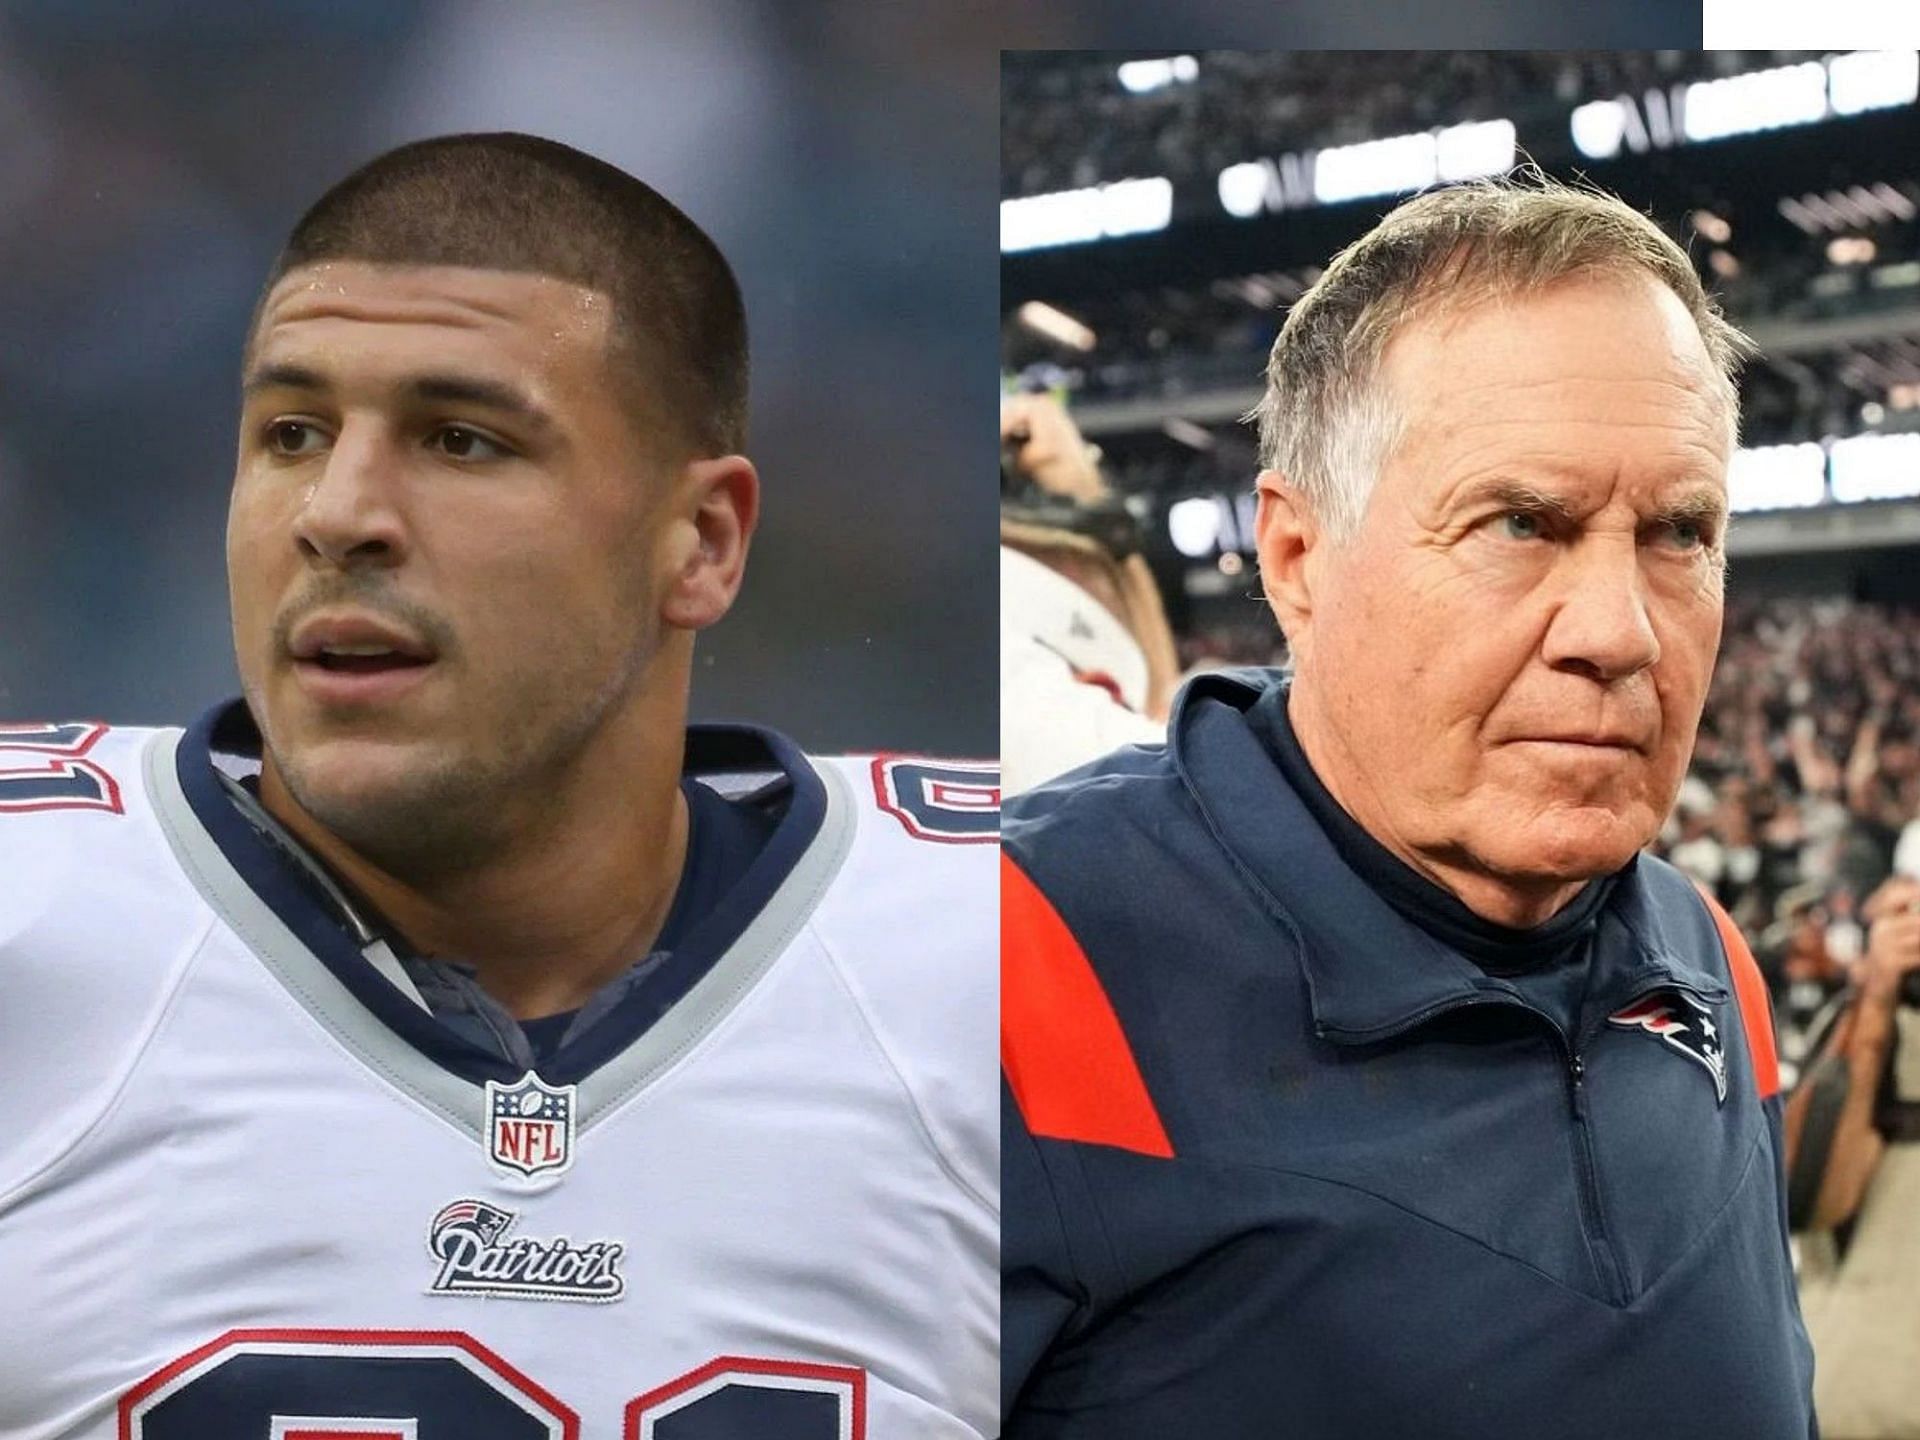 Bill Belichick and Aaron Hernandez with the New England Patriots